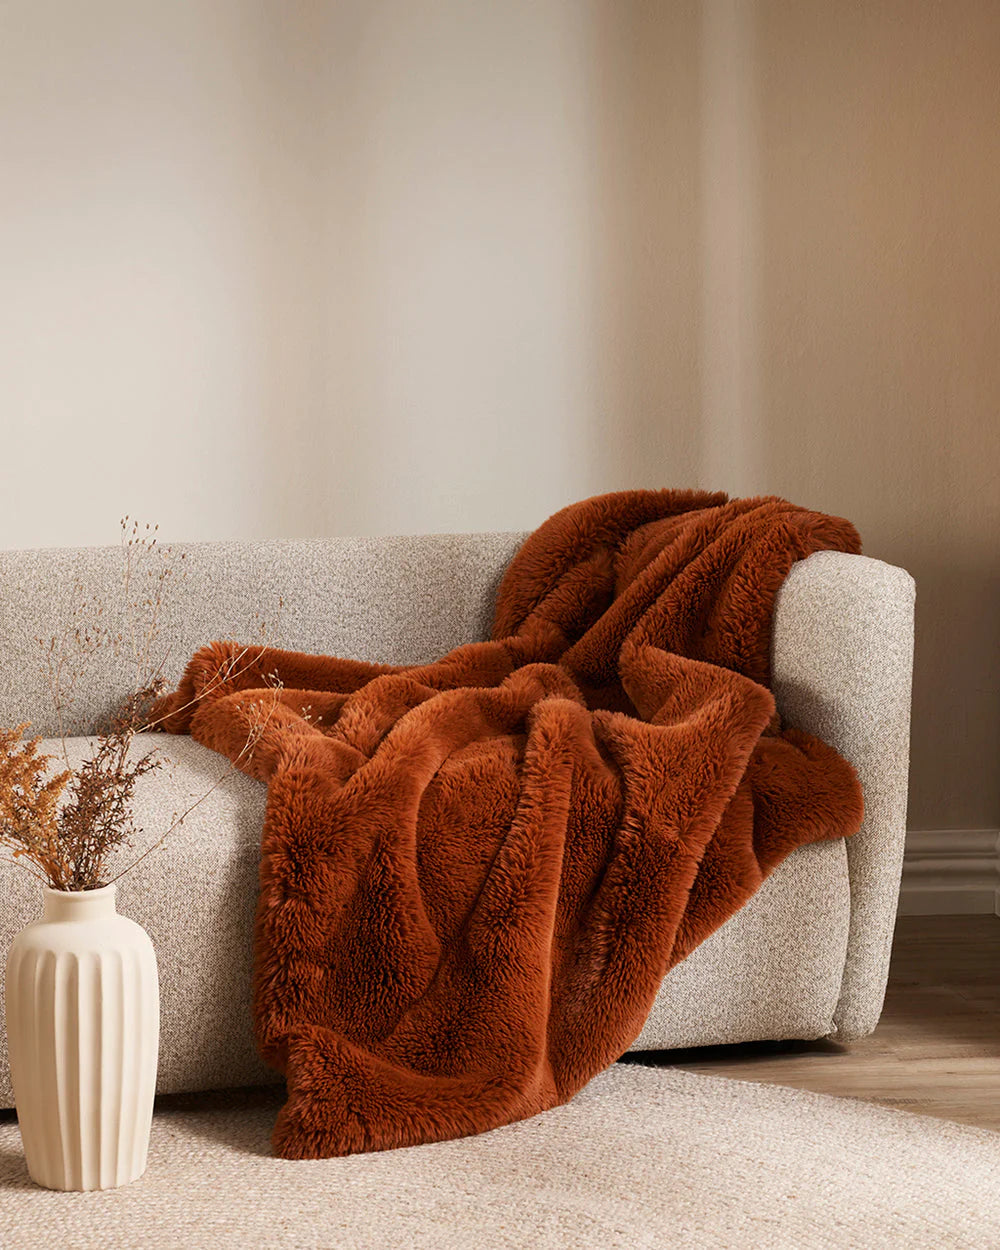 Baya Pele Faux Fur Sienna Throw Rug Blanket is available from Make Your House A Home Premium Stockist. Furniture Store Bendigo, Victoria. Australia Wide Delivery. Furtex.